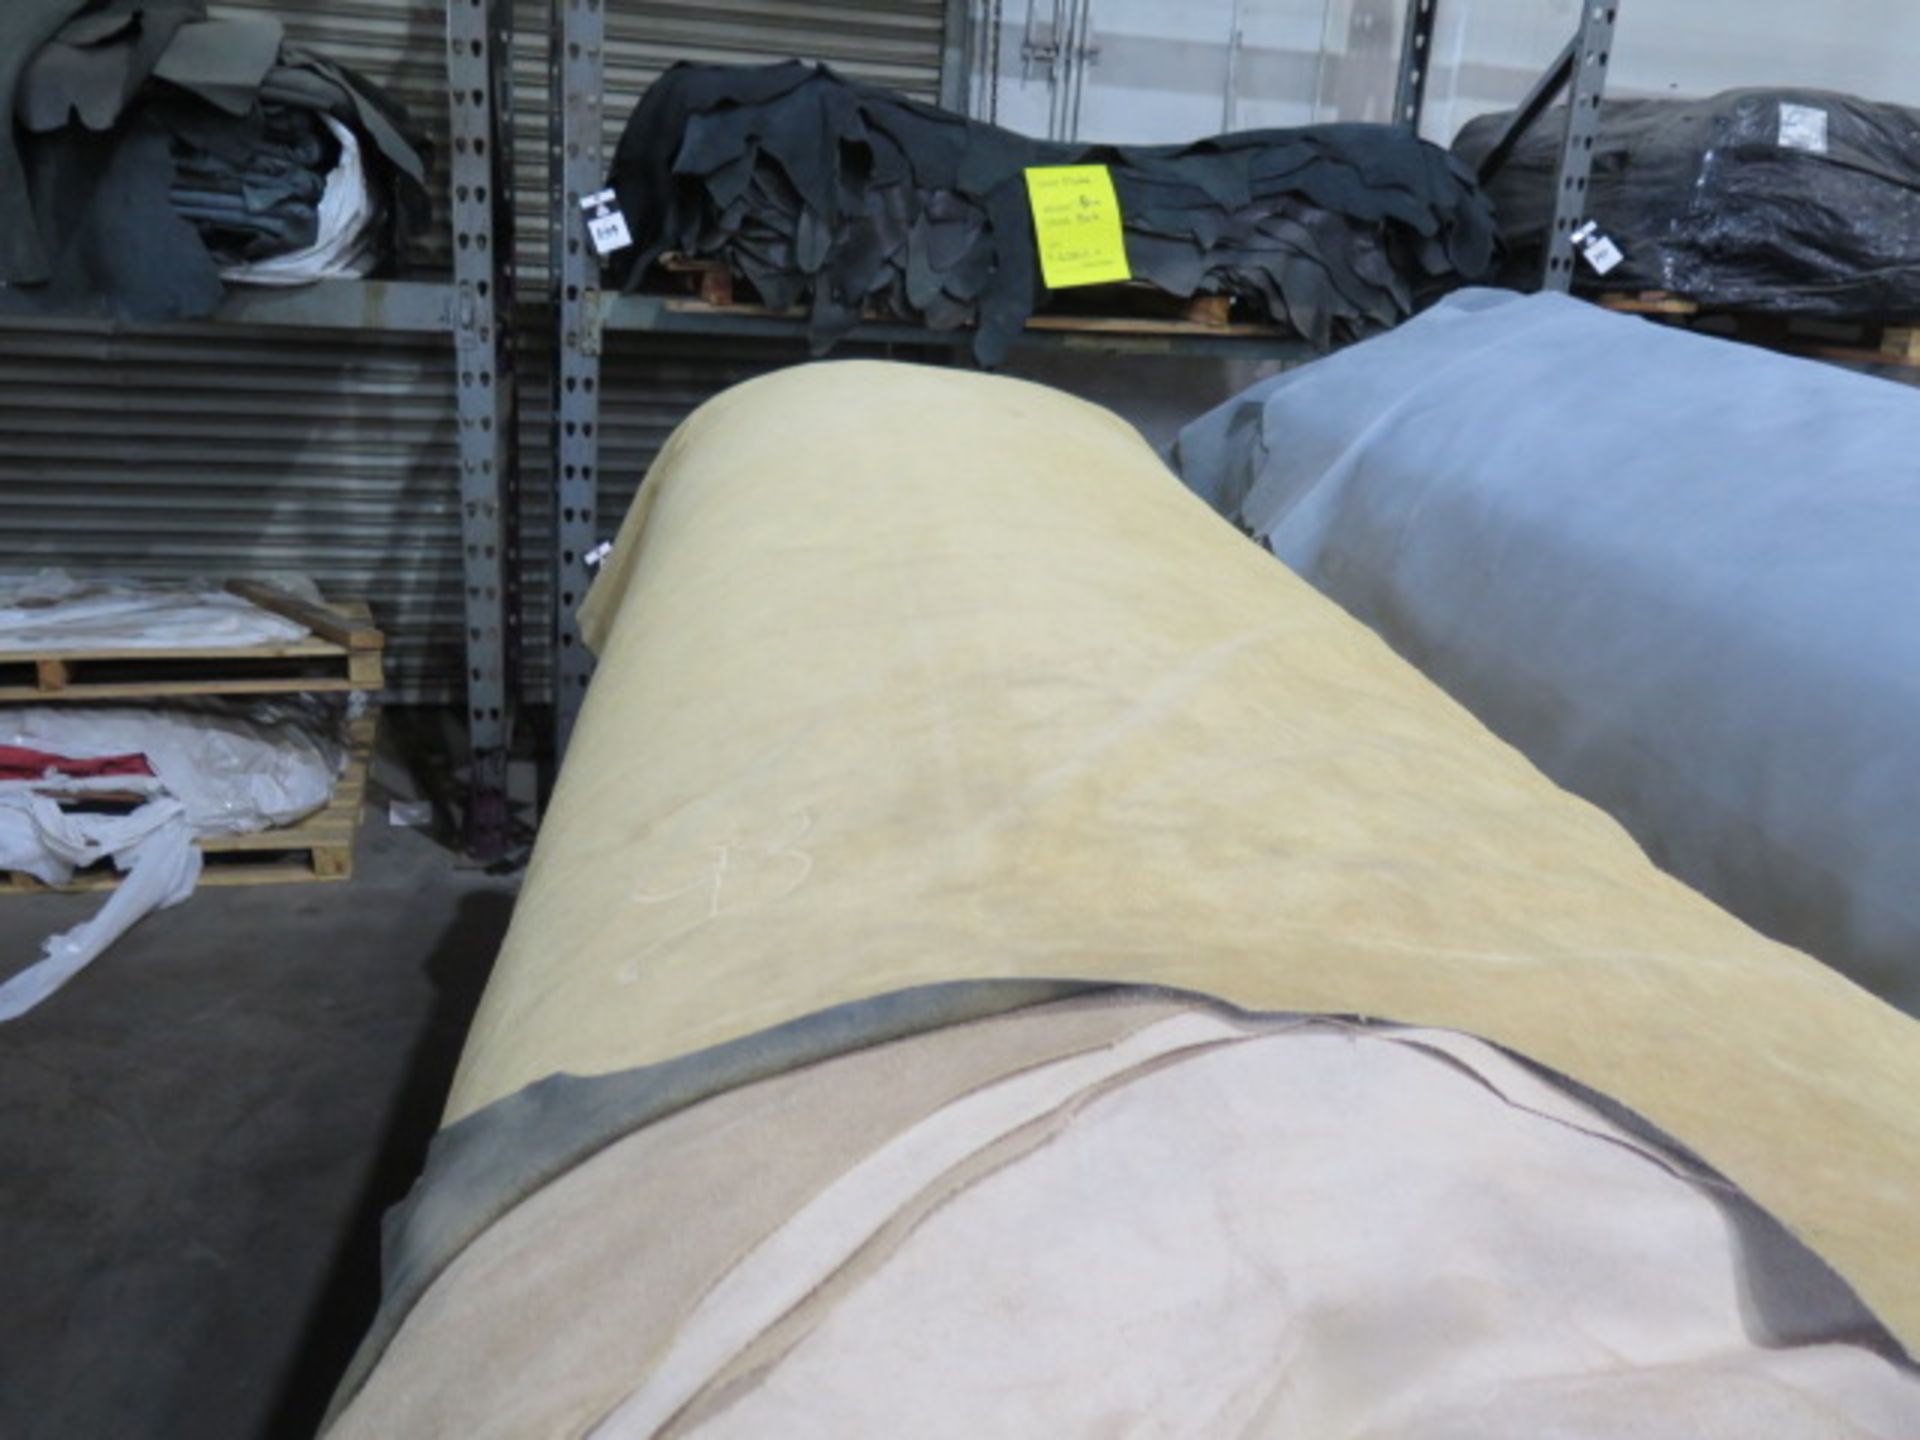 Leather Furniture Grade, 1.0mm, Beige, 3000 Sq/Ft, 60 Hides w/ Cart (SOLD AS-IS - NO WARRANTY) - Image 3 of 9